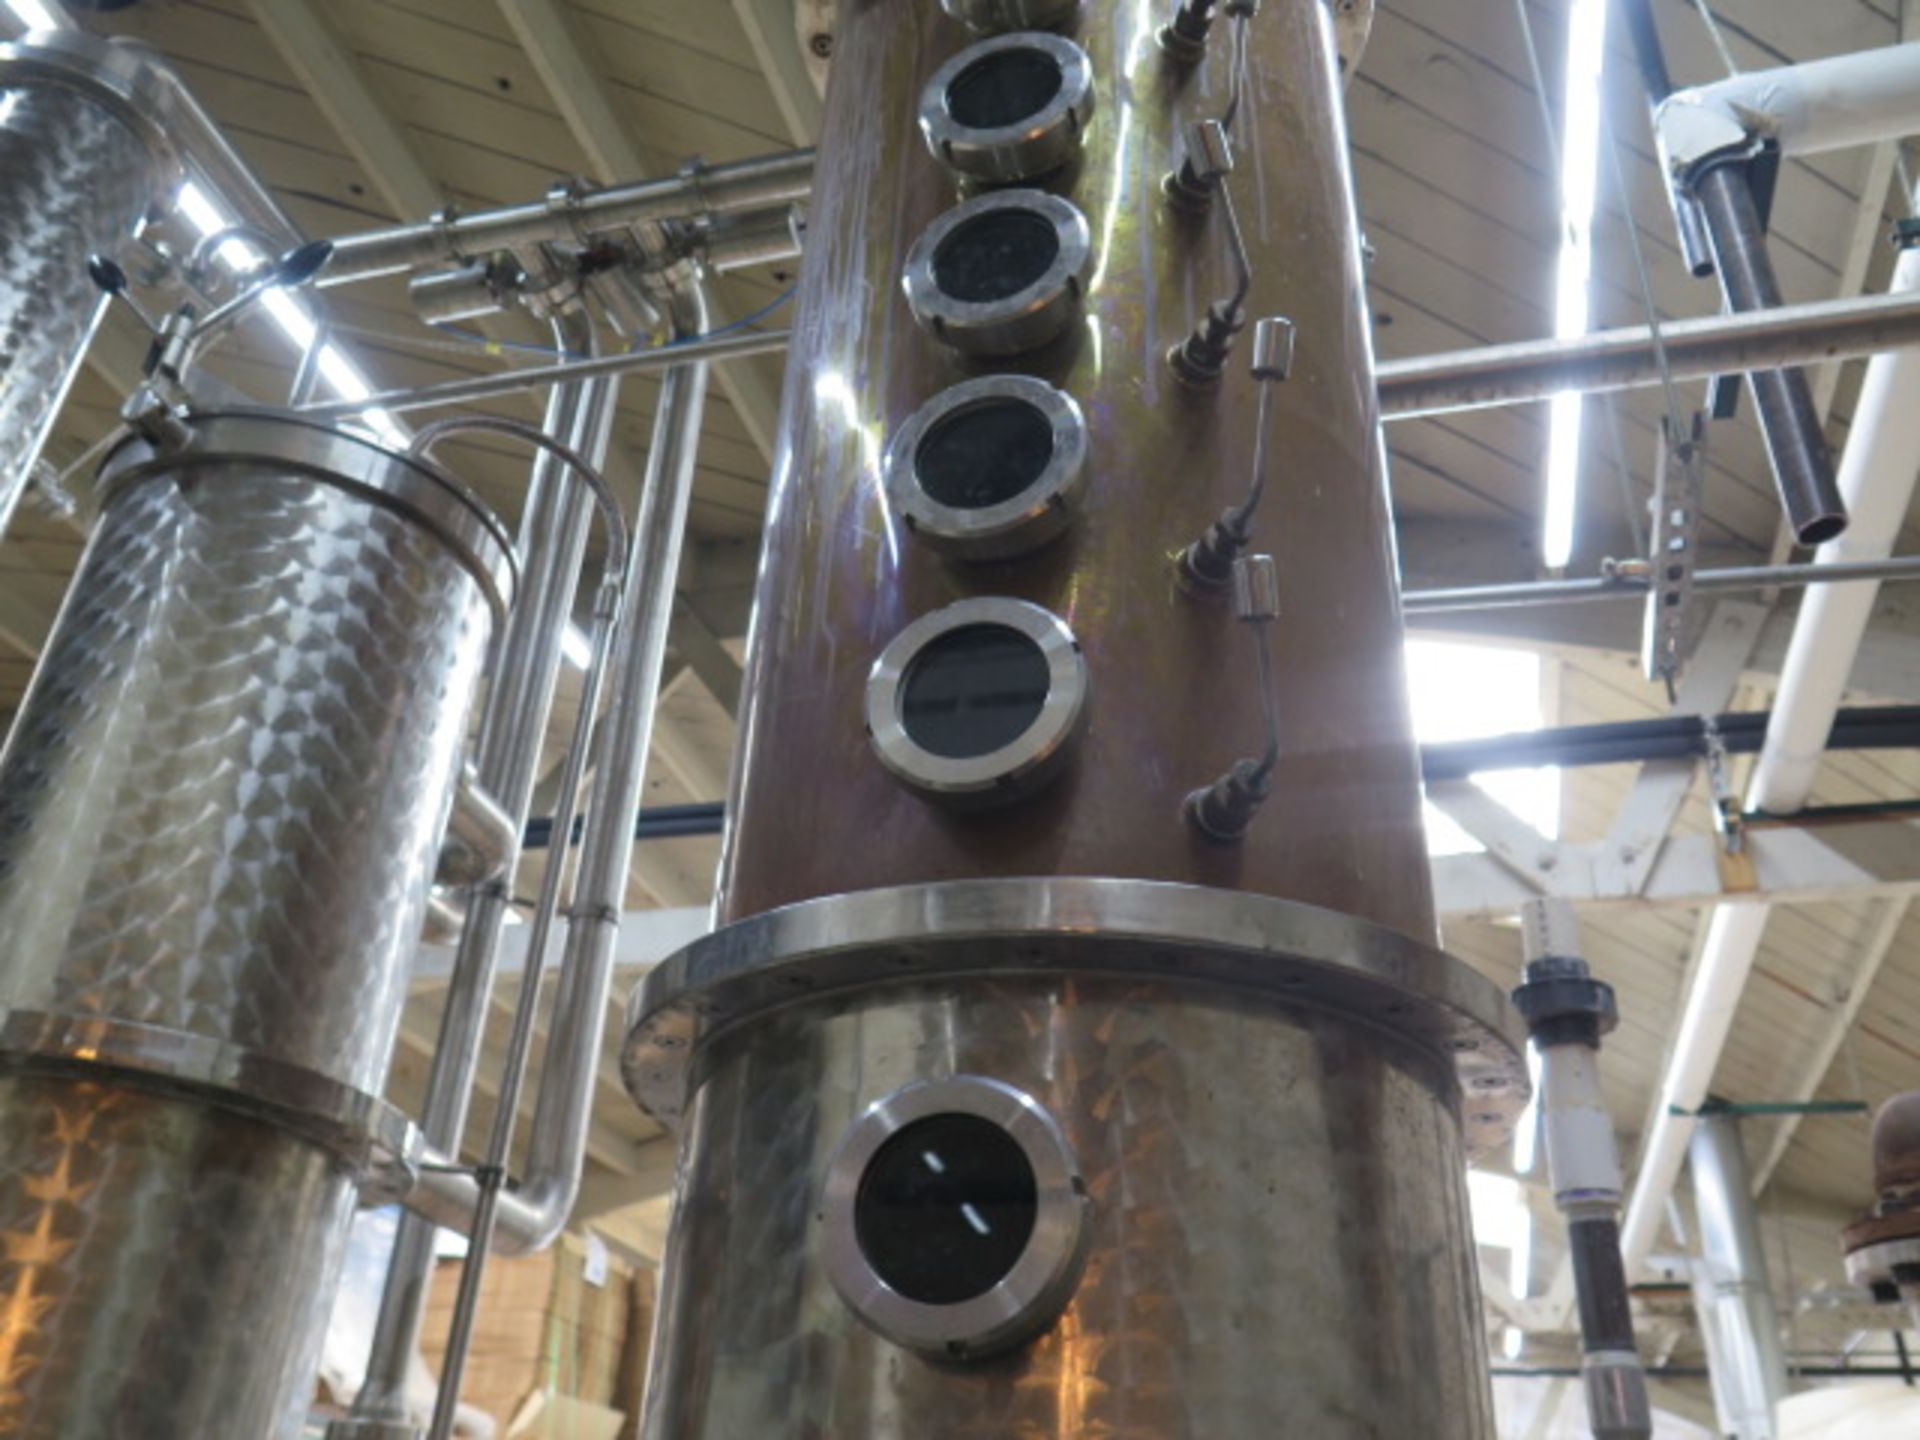 Carl Artesian Small Batch Distillery Still w/ Timers and Controls, 600 Liter Charge Cap, SOLD AS IS - Image 14 of 42